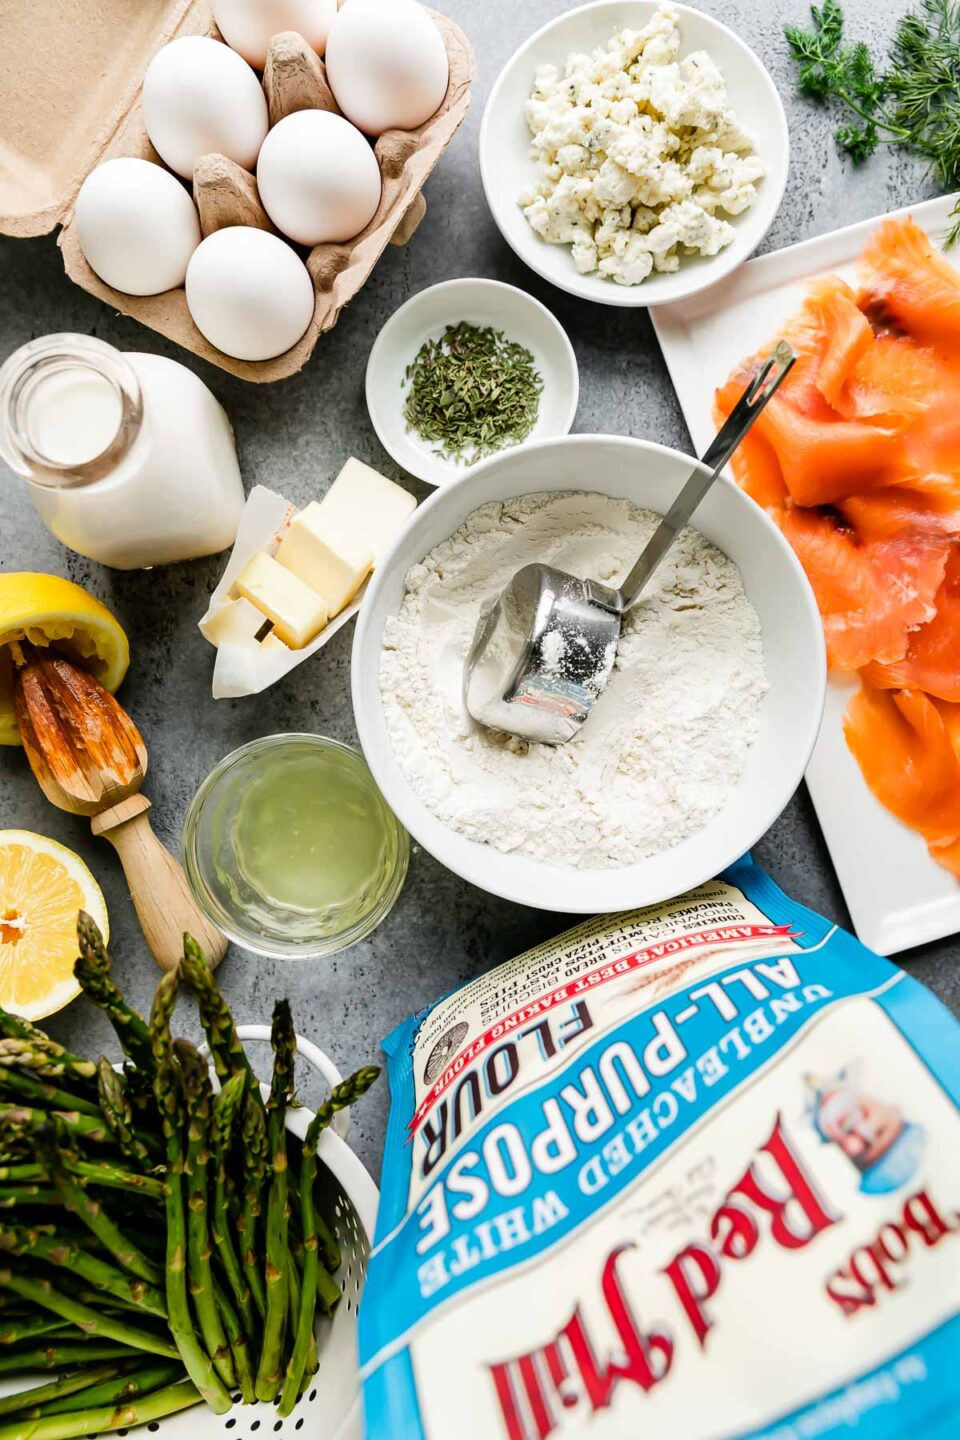 Savory dutch baby ingredients arranged on a light gray surface: unsalted butter, Bob's Red Mill Unbleached White All-Purpose Flour, whole milk, large eggs, dried thyme, fresh asparagus, lemon, smoked salmon, Boursin cheese, fresh herbs, kosher salt, and ground black pepper.